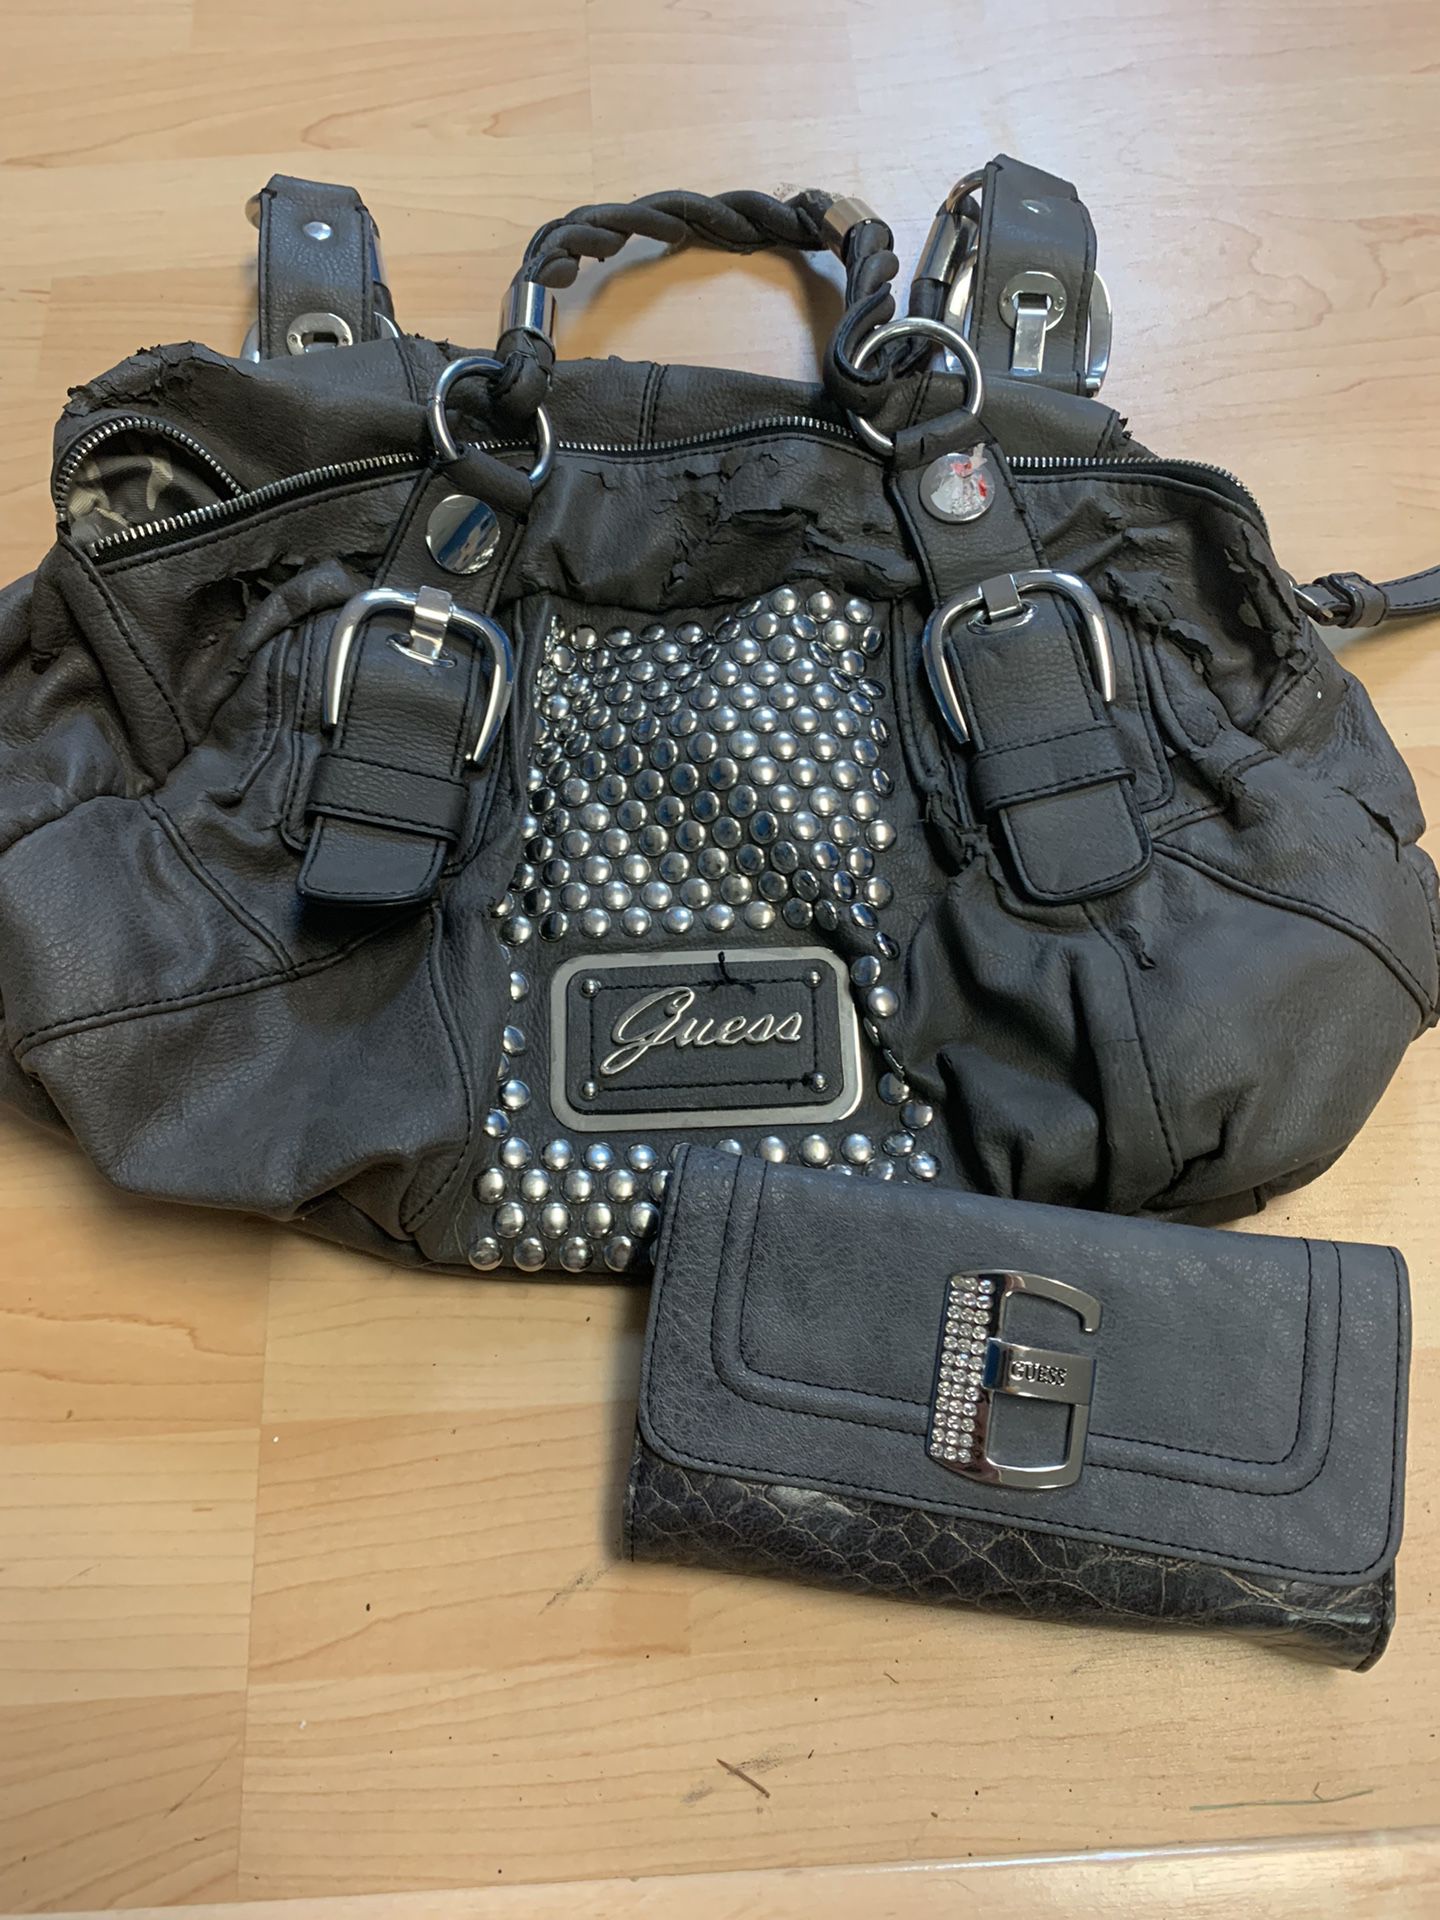 Guess purse and Wallet